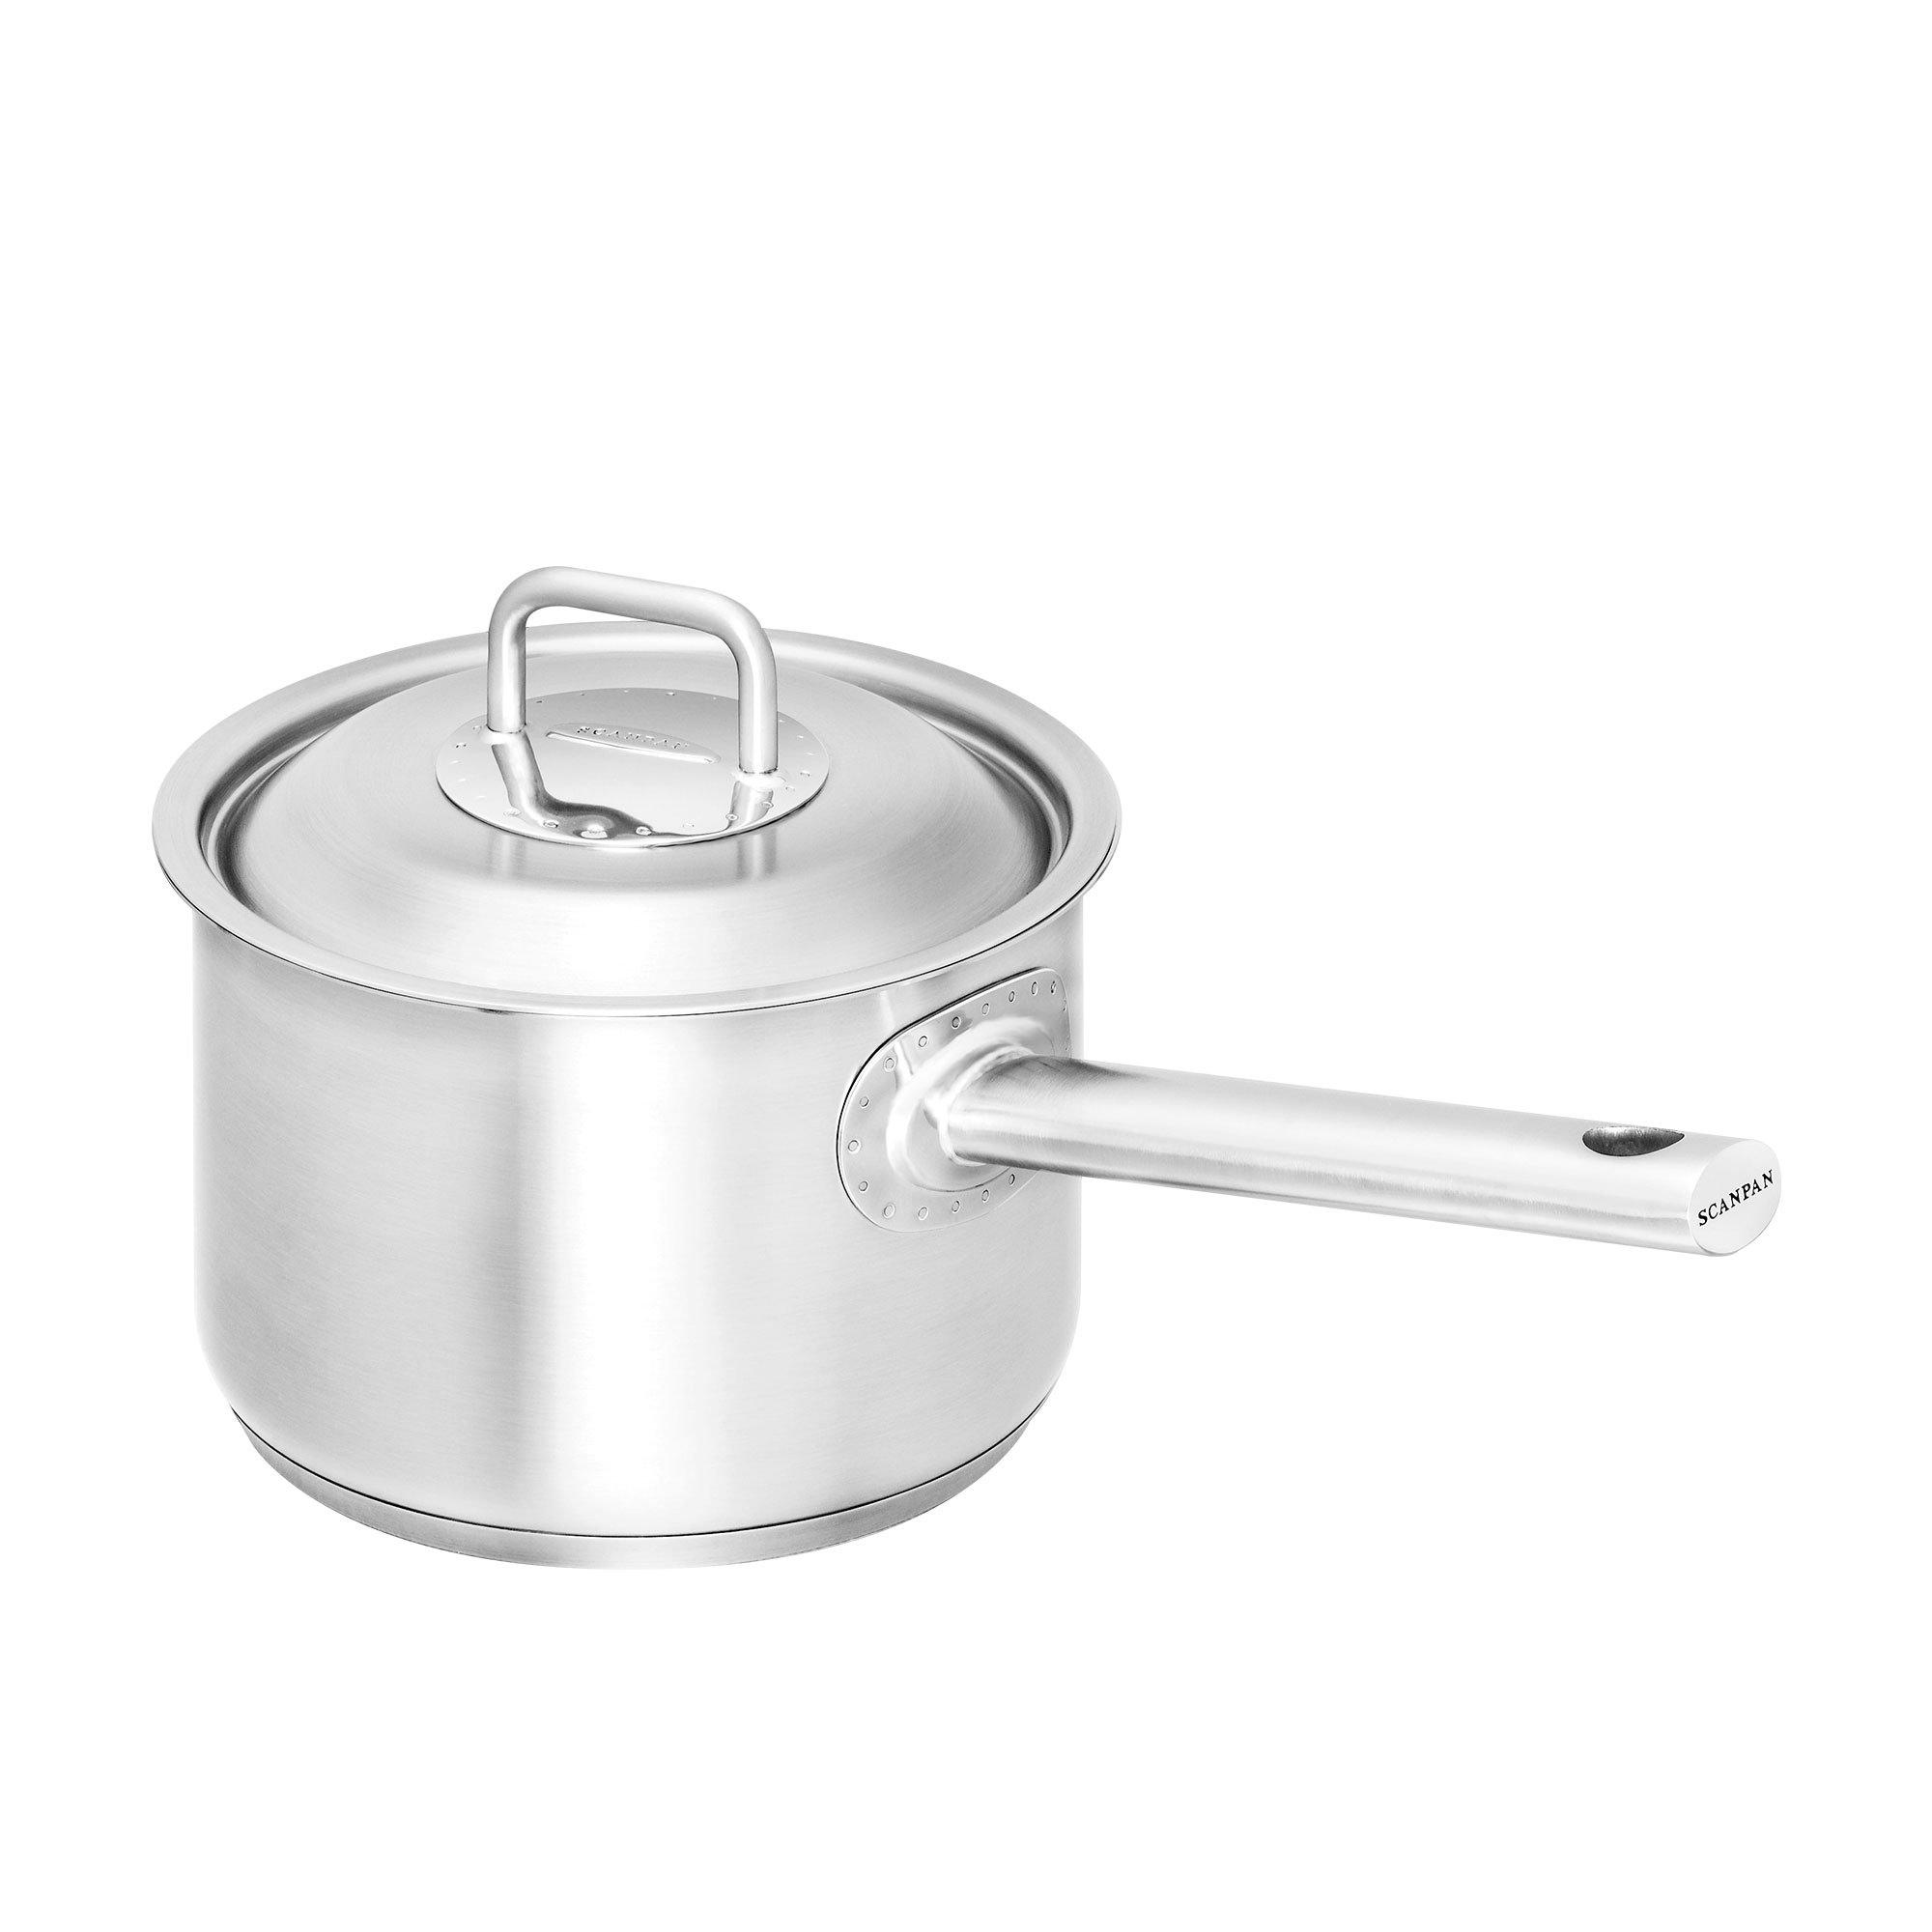 Scanpan Commercial Stainless Steel Covered Saucepan 18cm - 2.5L Image 1